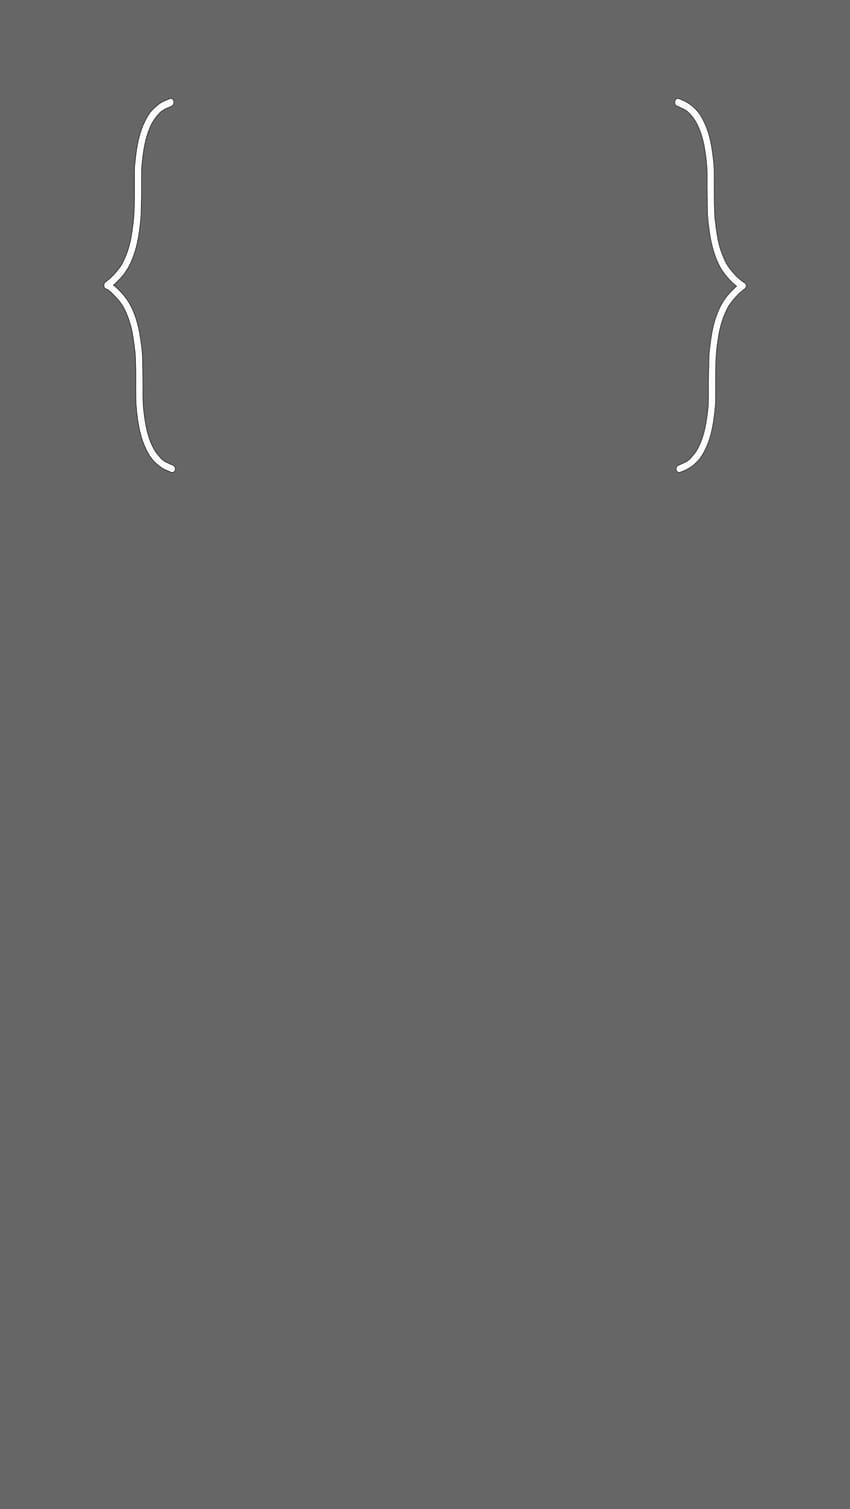 iPhone 6 Plus lock screen . Minimal gray with white clock outline. HD phone wallpaper